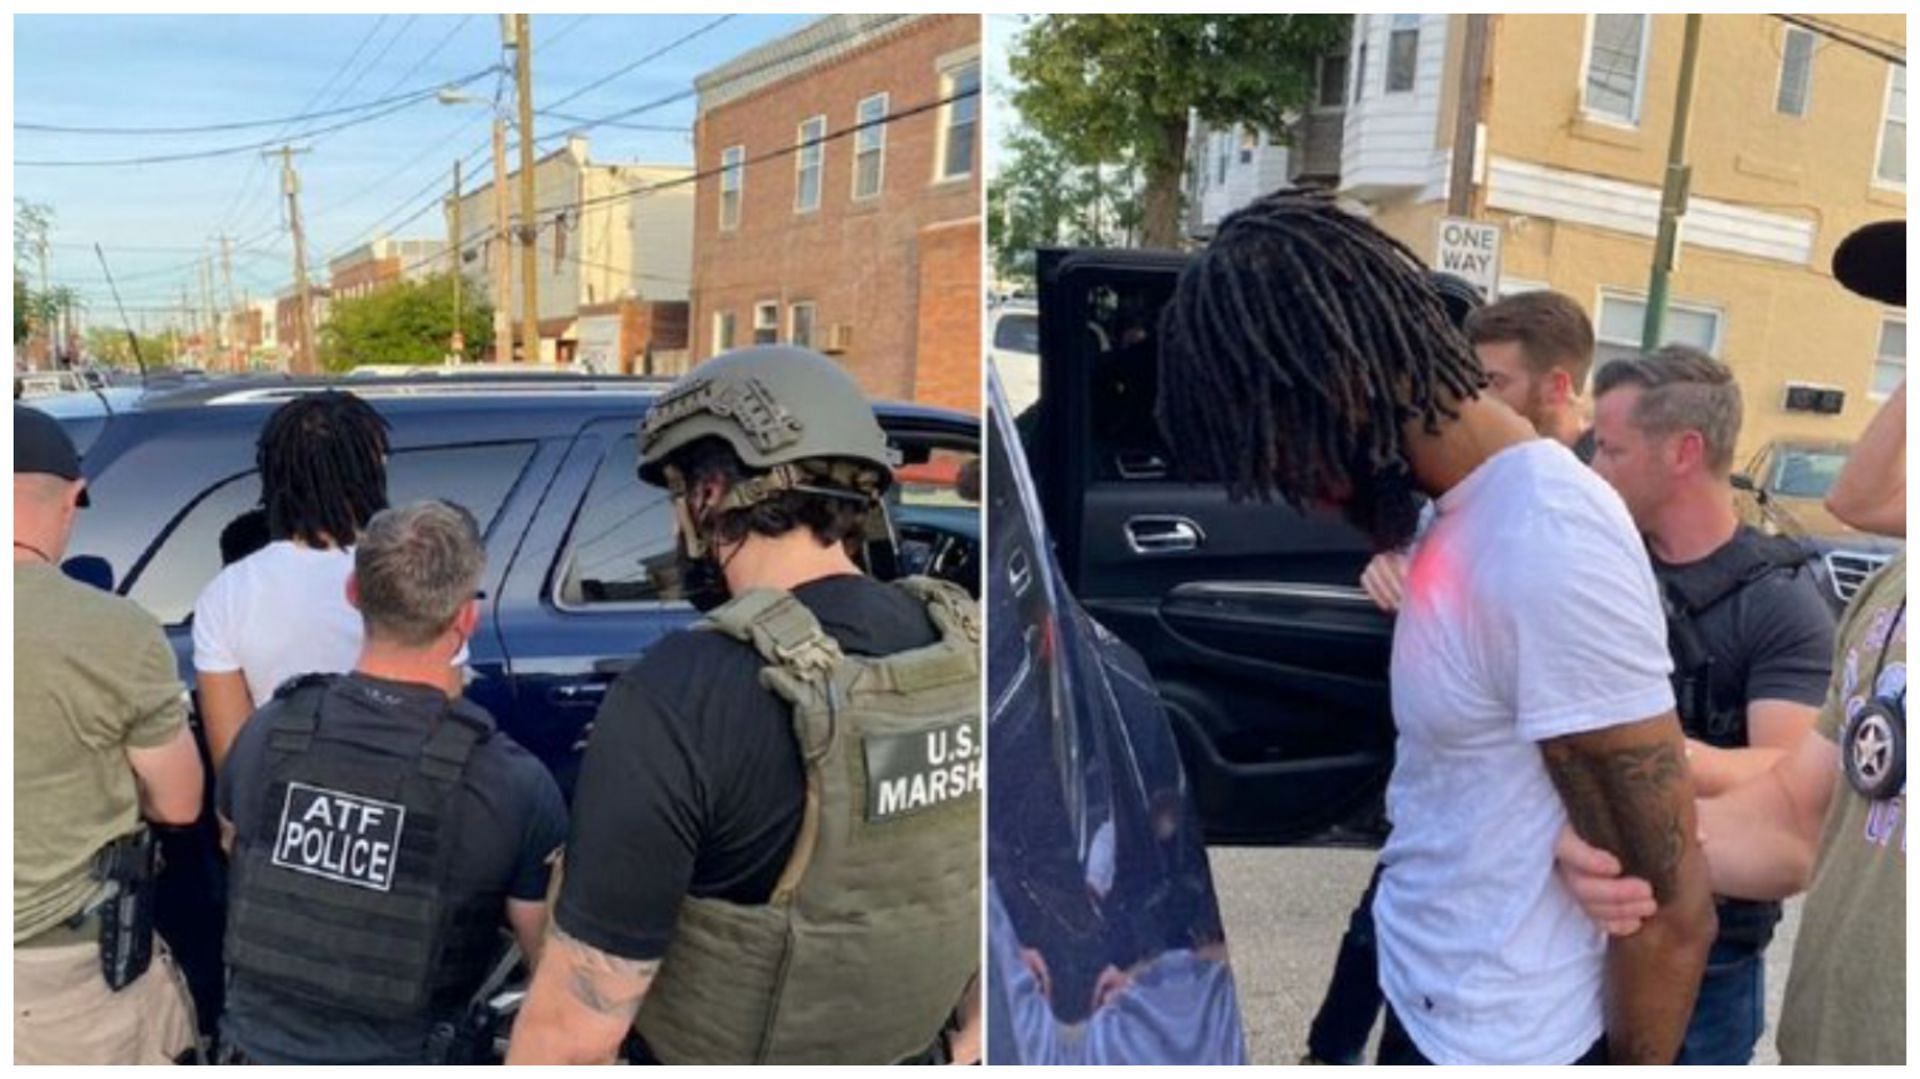 Two men arrested in connection to South Street massacre in Philadelphia (Image via Twitter)